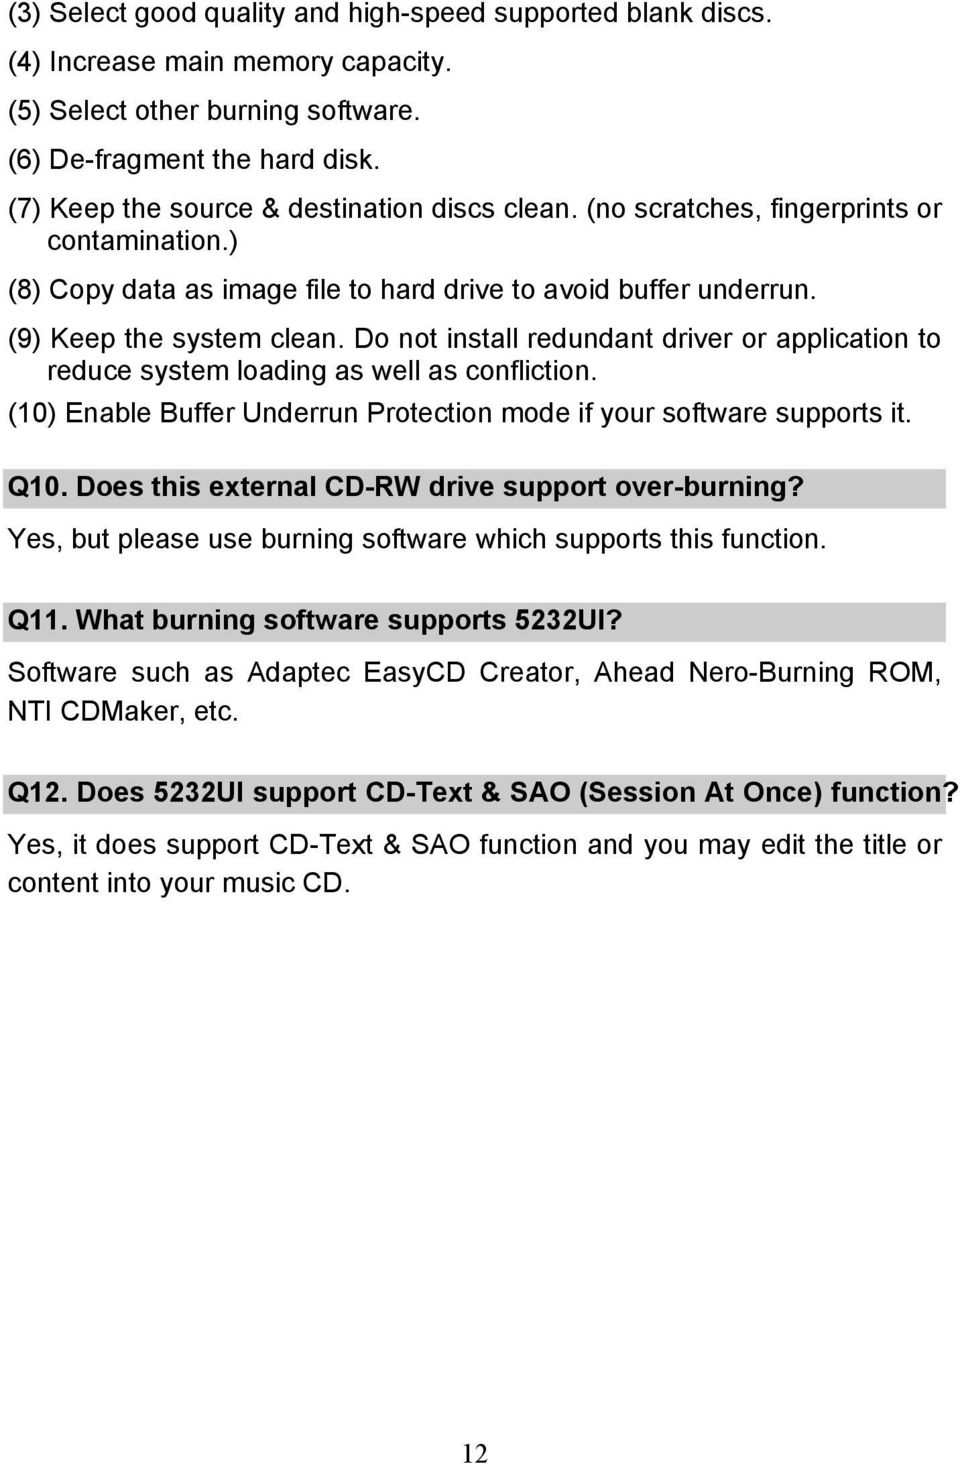 Do not install redundant driver or application to reduce system loading as well as confliction. (10) Enable Buffer Underrun Protection mode if your software supports it. Q10.